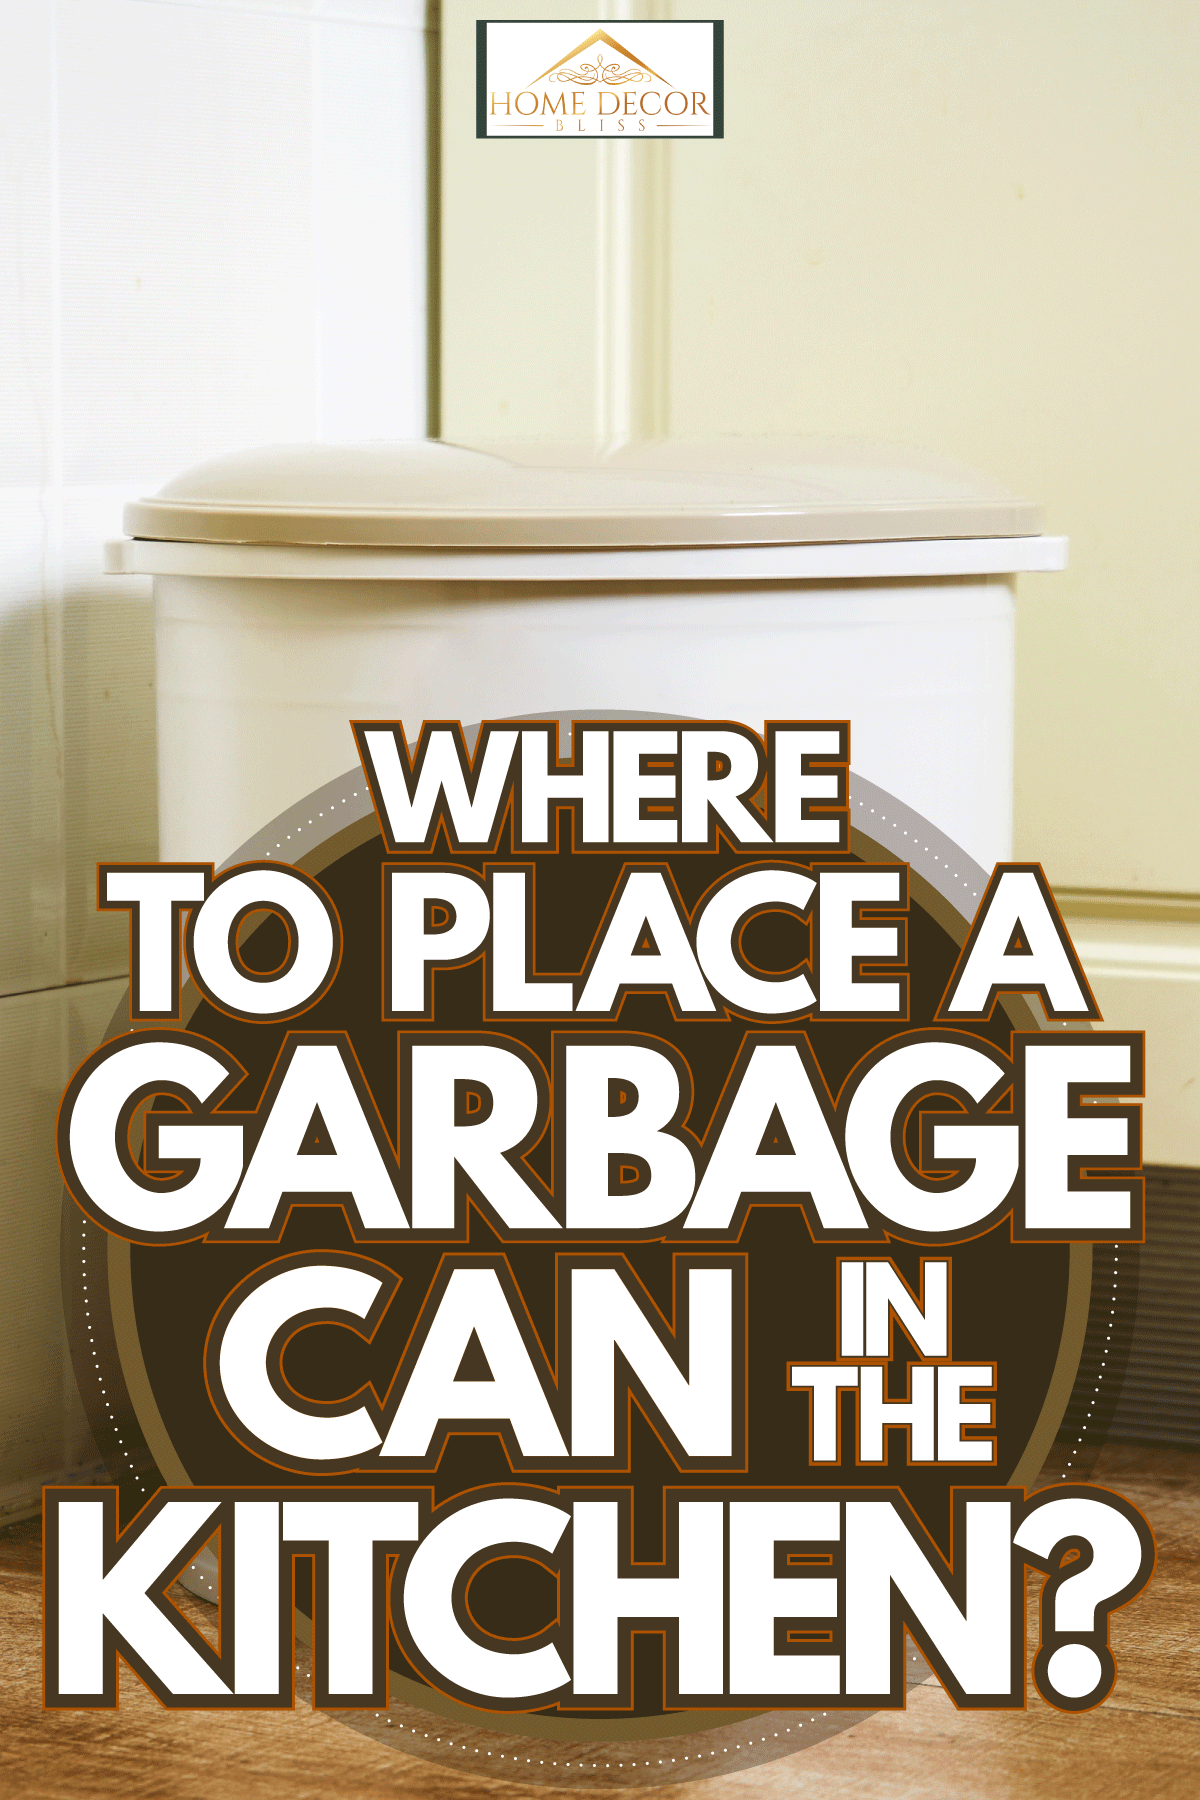 A trash bin placed on the corner of the kitchen, Where To Place A Garbage Can In The Kitchen? 